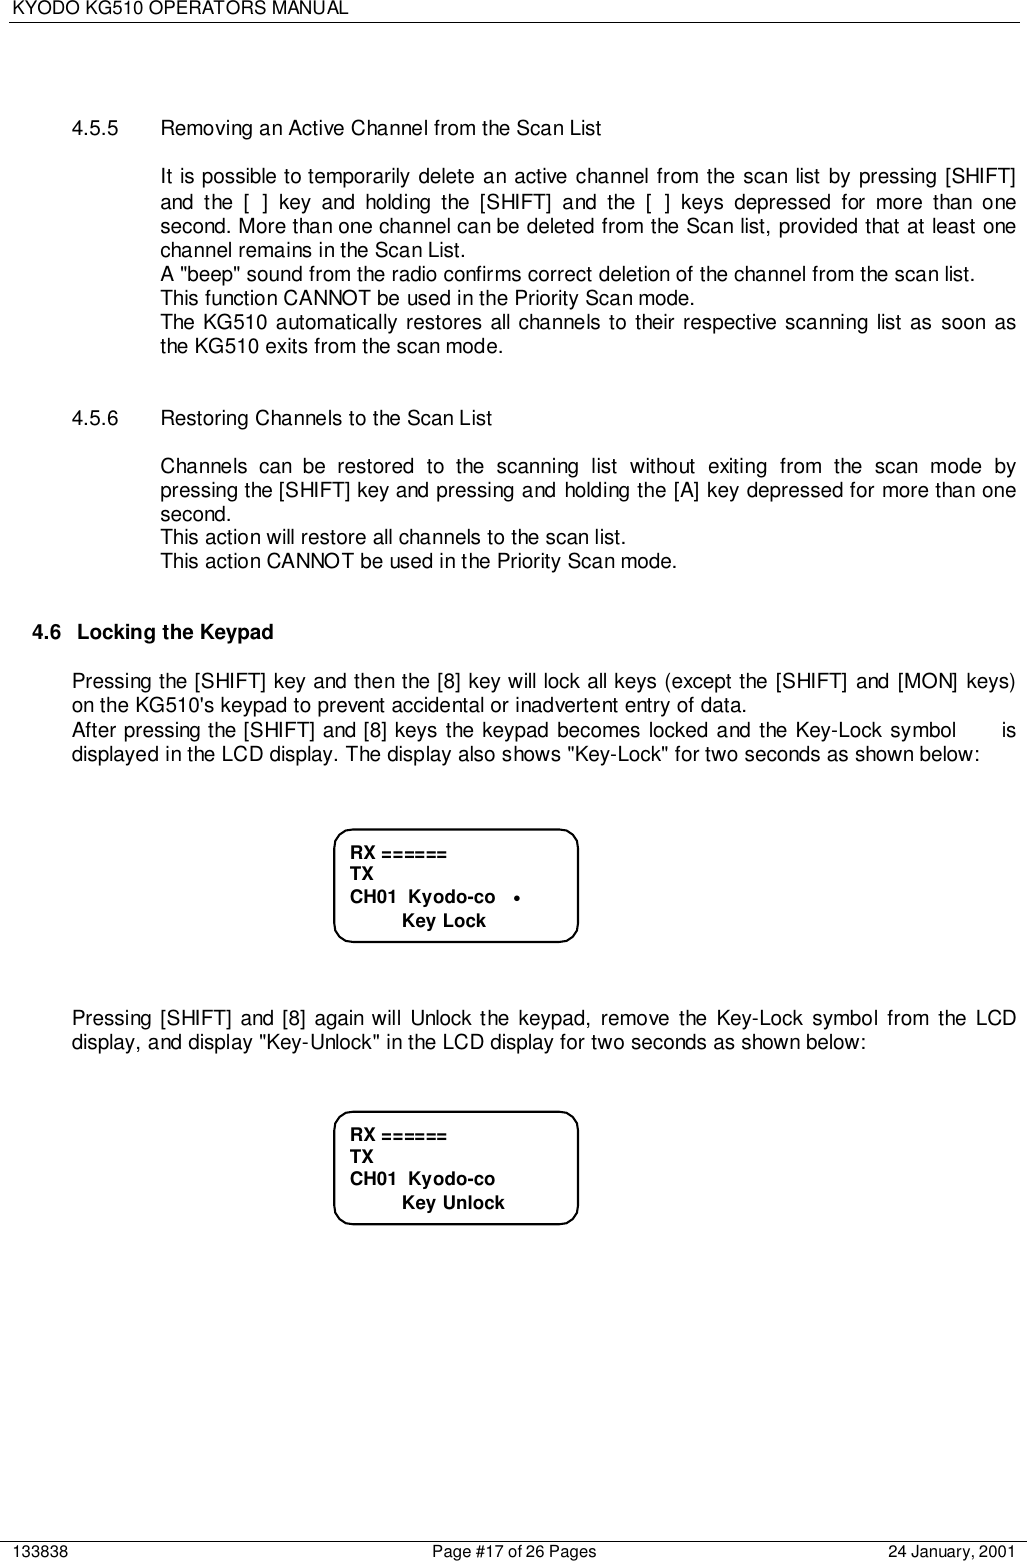 KYODO KG510 OPERATORS MANUAL133838 Page #17 of 26 Pages 24 January, 20014.5.5  Removing an Active Channel from the Scan ListIt is possible to temporarily delete an active channel from the scan list by pressing [SHIFT]and the [ ] key and holding the [SHIFT] and the [ ] keys depressed for more than onesecond. More than one channel can be deleted from the Scan list, provided that at least onechannel remains in the Scan List.A &quot;beep&quot; sound from the radio confirms correct deletion of the channel from the scan list.This function CANNOT be used in the Priority Scan mode.The KG510 automatically restores all channels to their respective scanning list as soon asthe KG510 exits from the scan mode.4.5.6  Restoring Channels to the Scan ListChannels can be restored to the scanning list without exiting from the scan mode bypressing the [SHIFT] key and pressing and holding the [A] key depressed for more than onesecond.This action will restore all channels to the scan list.This action CANNOT be used in the Priority Scan mode.4.6  Locking the KeypadPressing the [SHIFT] key and then the [8] key will lock all keys (except the [SHIFT] and [MON] keys)on the KG510&apos;s keypad to prevent accidental or inadvertent entry of data.After pressing the [SHIFT] and [8] keys the keypad becomes locked and the Key-Lock symbol     isdisplayed in the LCD display. The display also shows &quot;Key-Lock&quot; for two seconds as shown below:Pressing [SHIFT] and [8] again will Unlock the keypad, remove the Key-Lock symbol from the LCDdisplay, and display &quot;Key-Unlock&quot; in the LCD display for two seconds as shown below:RX ======TXCH01  Kyodo-co          Key UnlockRX ======TXCH01  Kyodo-co   •          Key Lock